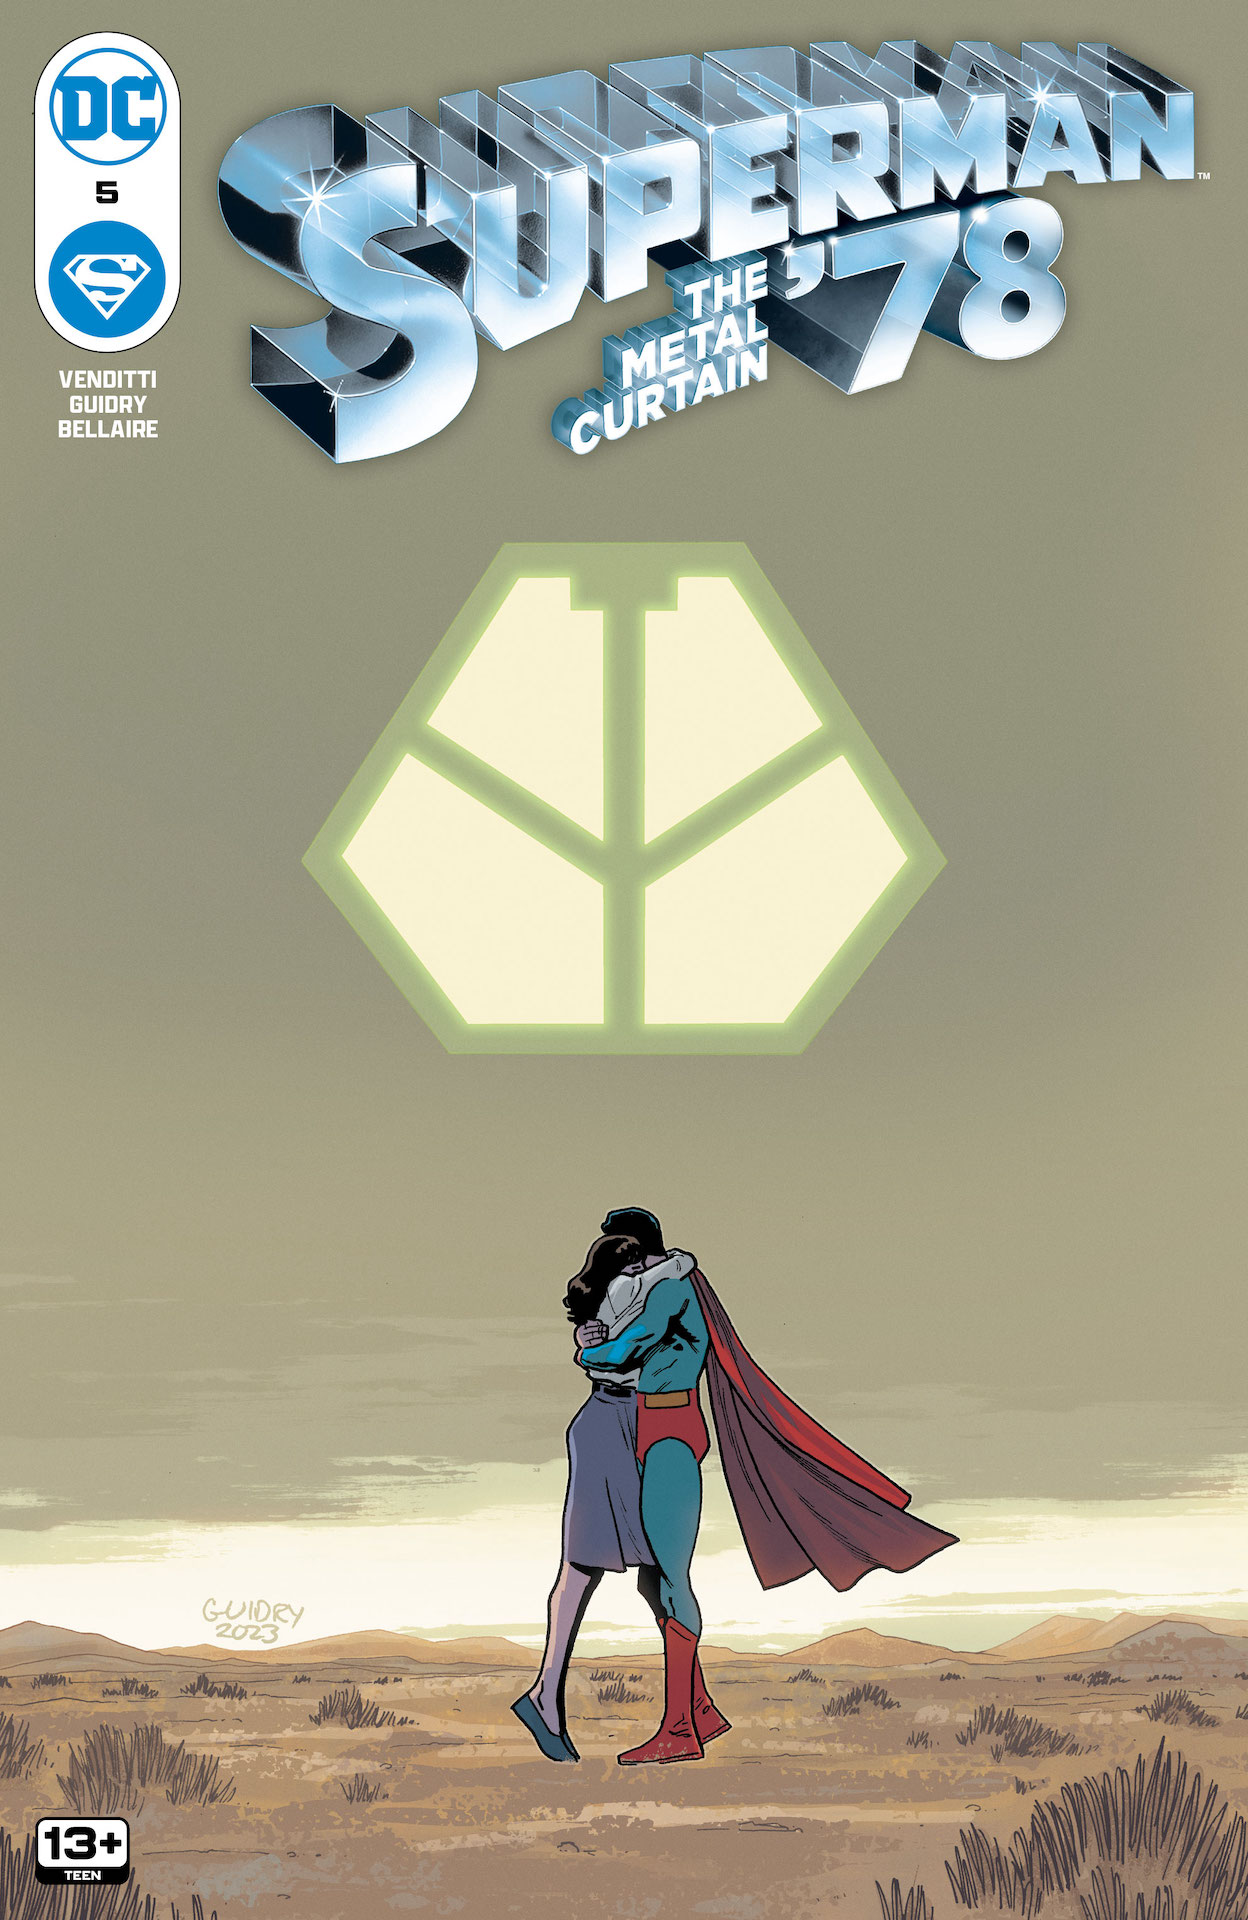 DC Preview: Superman '78: The Metal Curtain #5